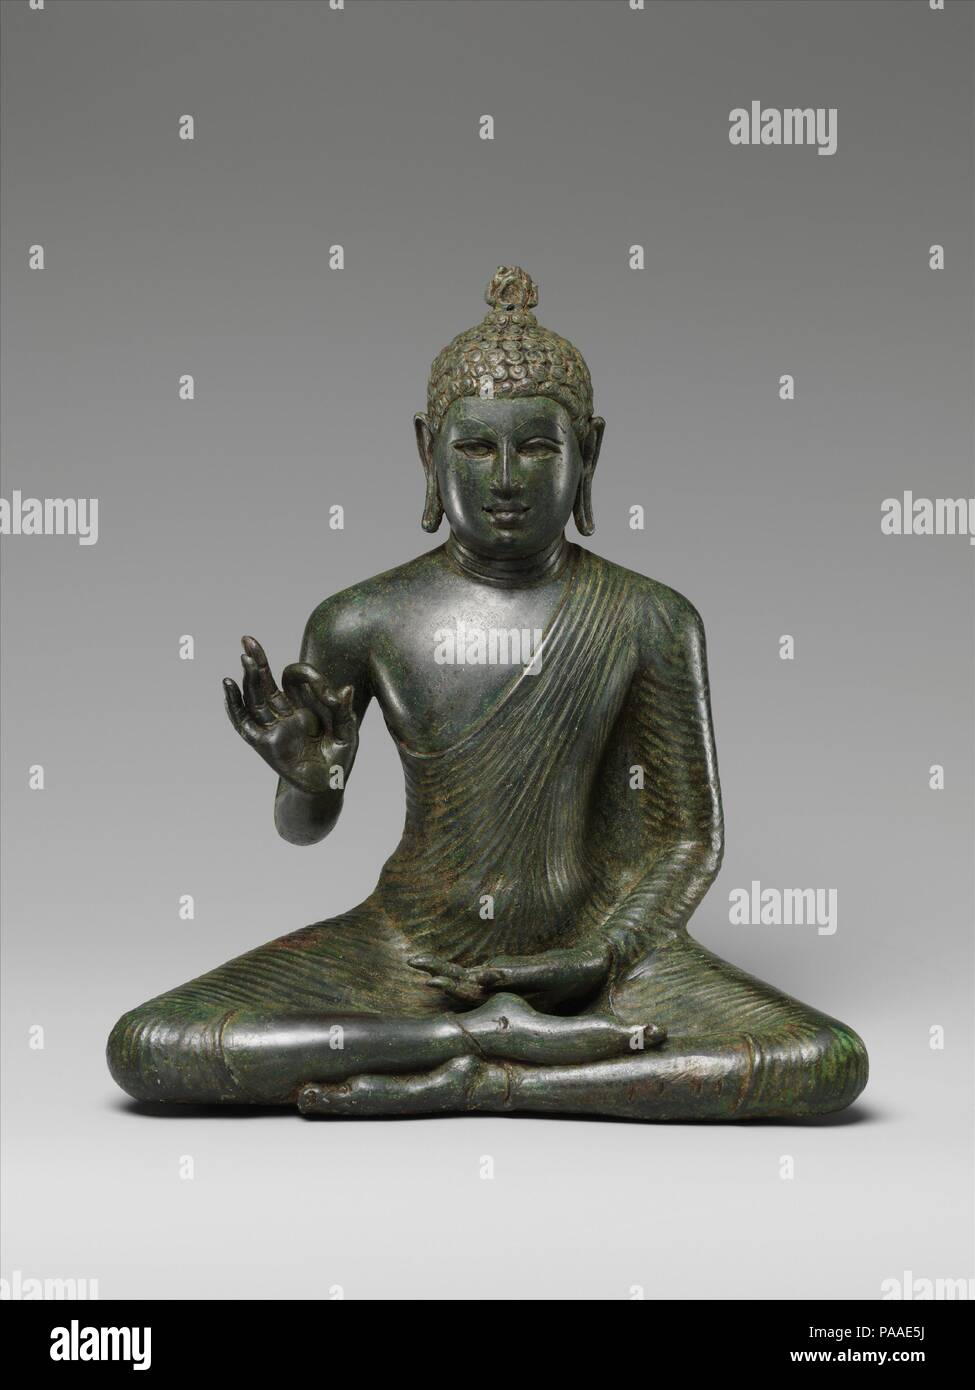 Buddha Expounding the Dharma. Culture: Sri Lanka (Anuradhapura). Dimensions: H. 10 1/2 in. (26.7 cm); W. 11 in. (7.9 cm); D. 4 1/2 in. (11.4 cm). Date: late 8th century.  The quintessential icon of early Buddhist Sri Lanka is the Buddha gesturing vitarka-mudra, imparting his dharma to all. Seated in a meditative yogic posture, he wears the monk's uttarasanga, an untailored length of cloth drawn tautly around the body, with his right shoulder exposed in the southern manner of Buddhism. His hair is expressed in short, tight curls to evoke his renunciation of the material world, when he cut off h Stock Photo